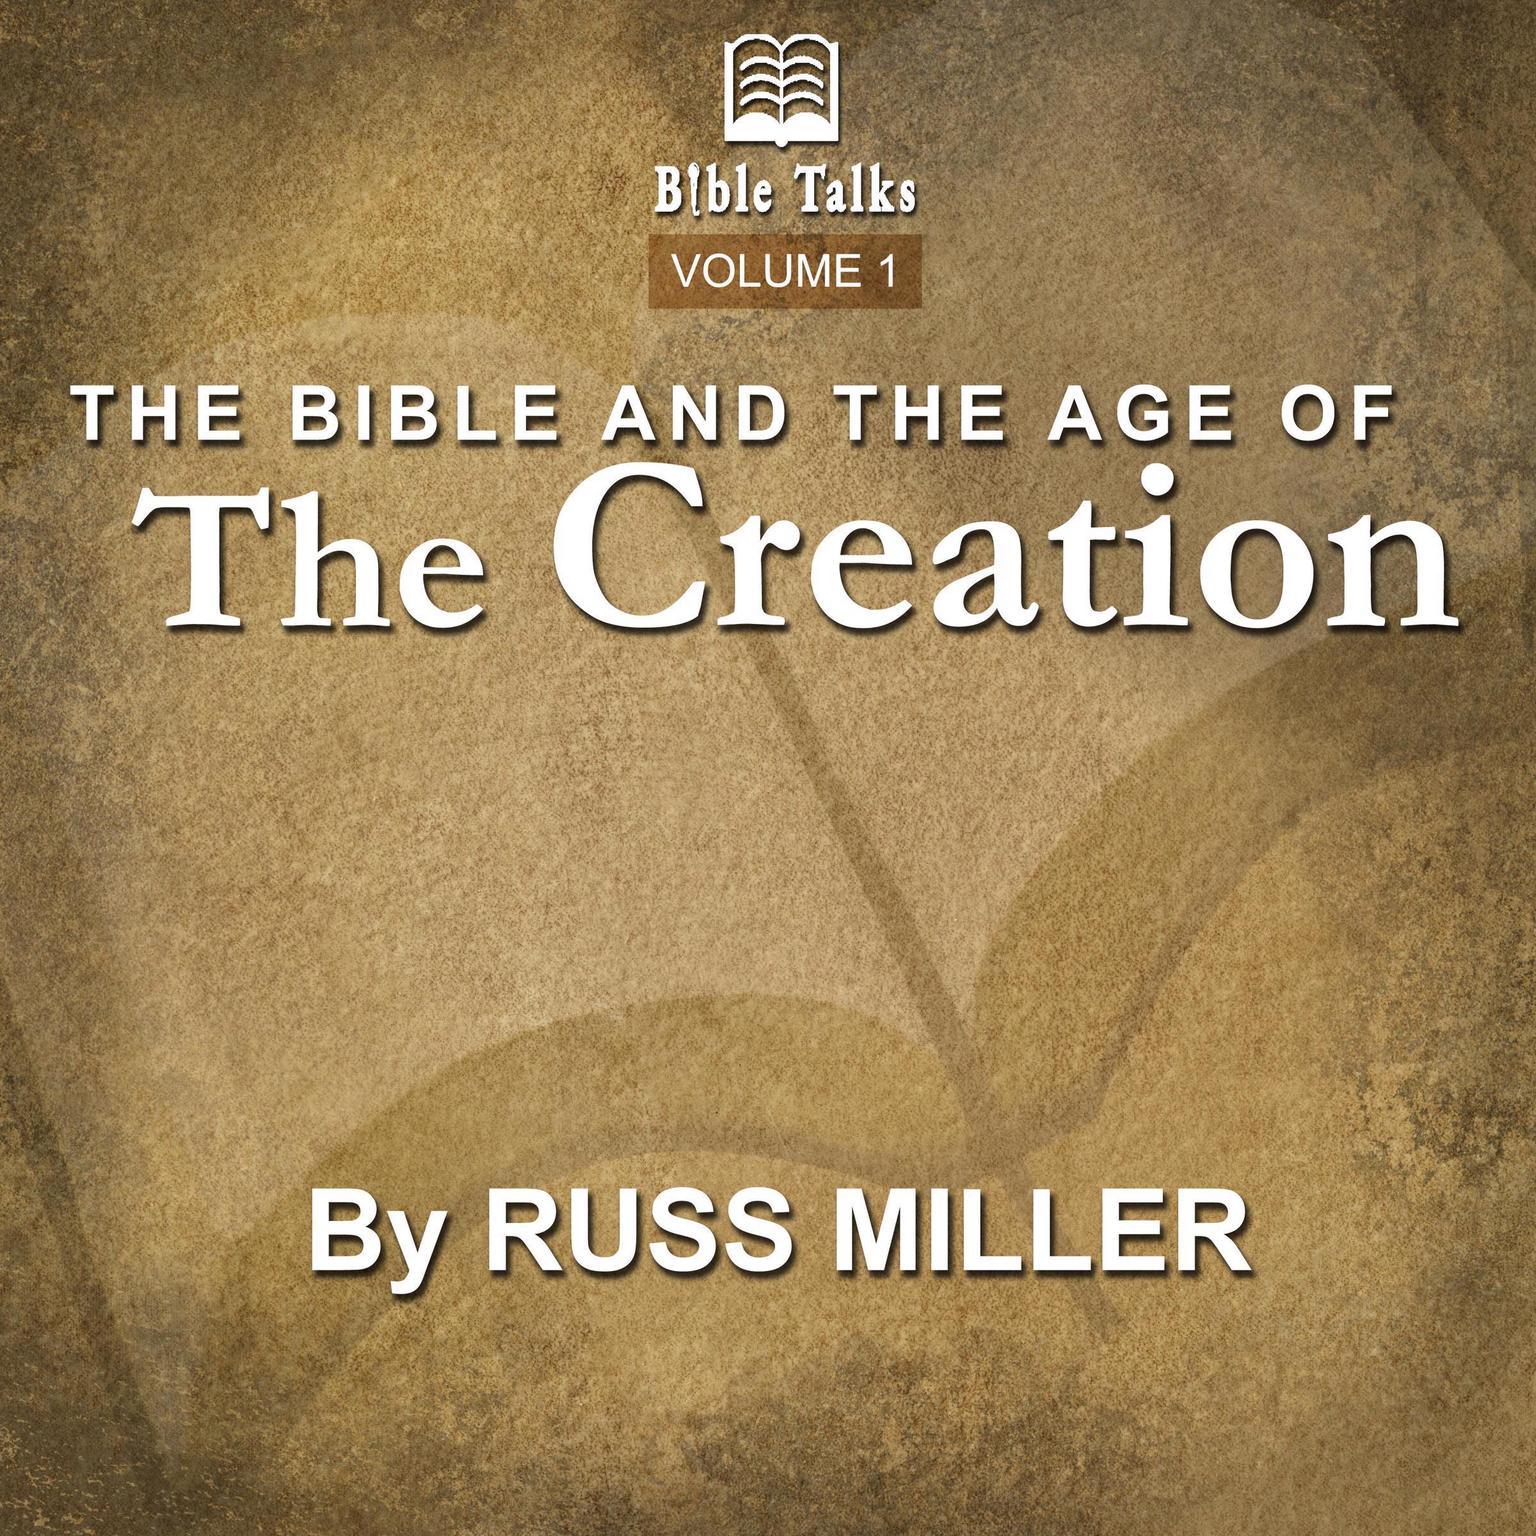 The Bible And The Age Of The Creation - Volume 1 Audiobook, by Russ Miller